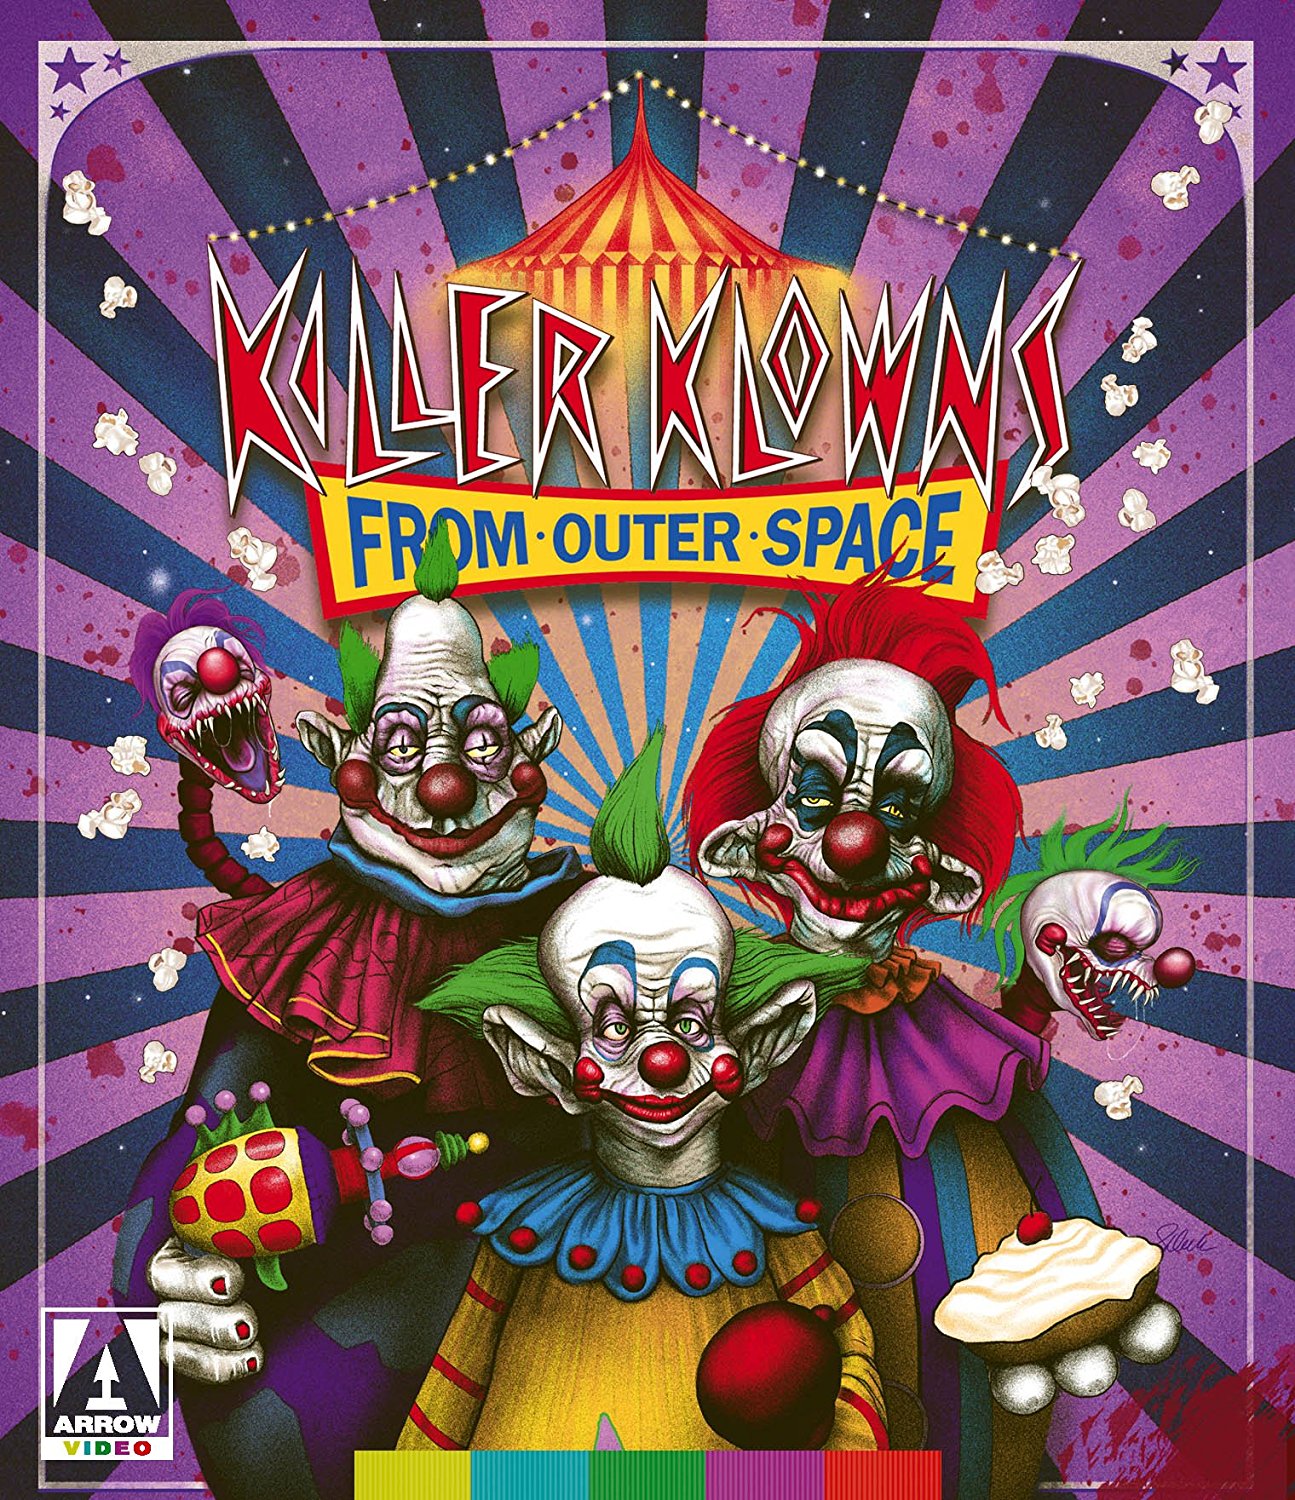 Return Of The Killer Klowns From Outer Space In 3D, 59% OFF